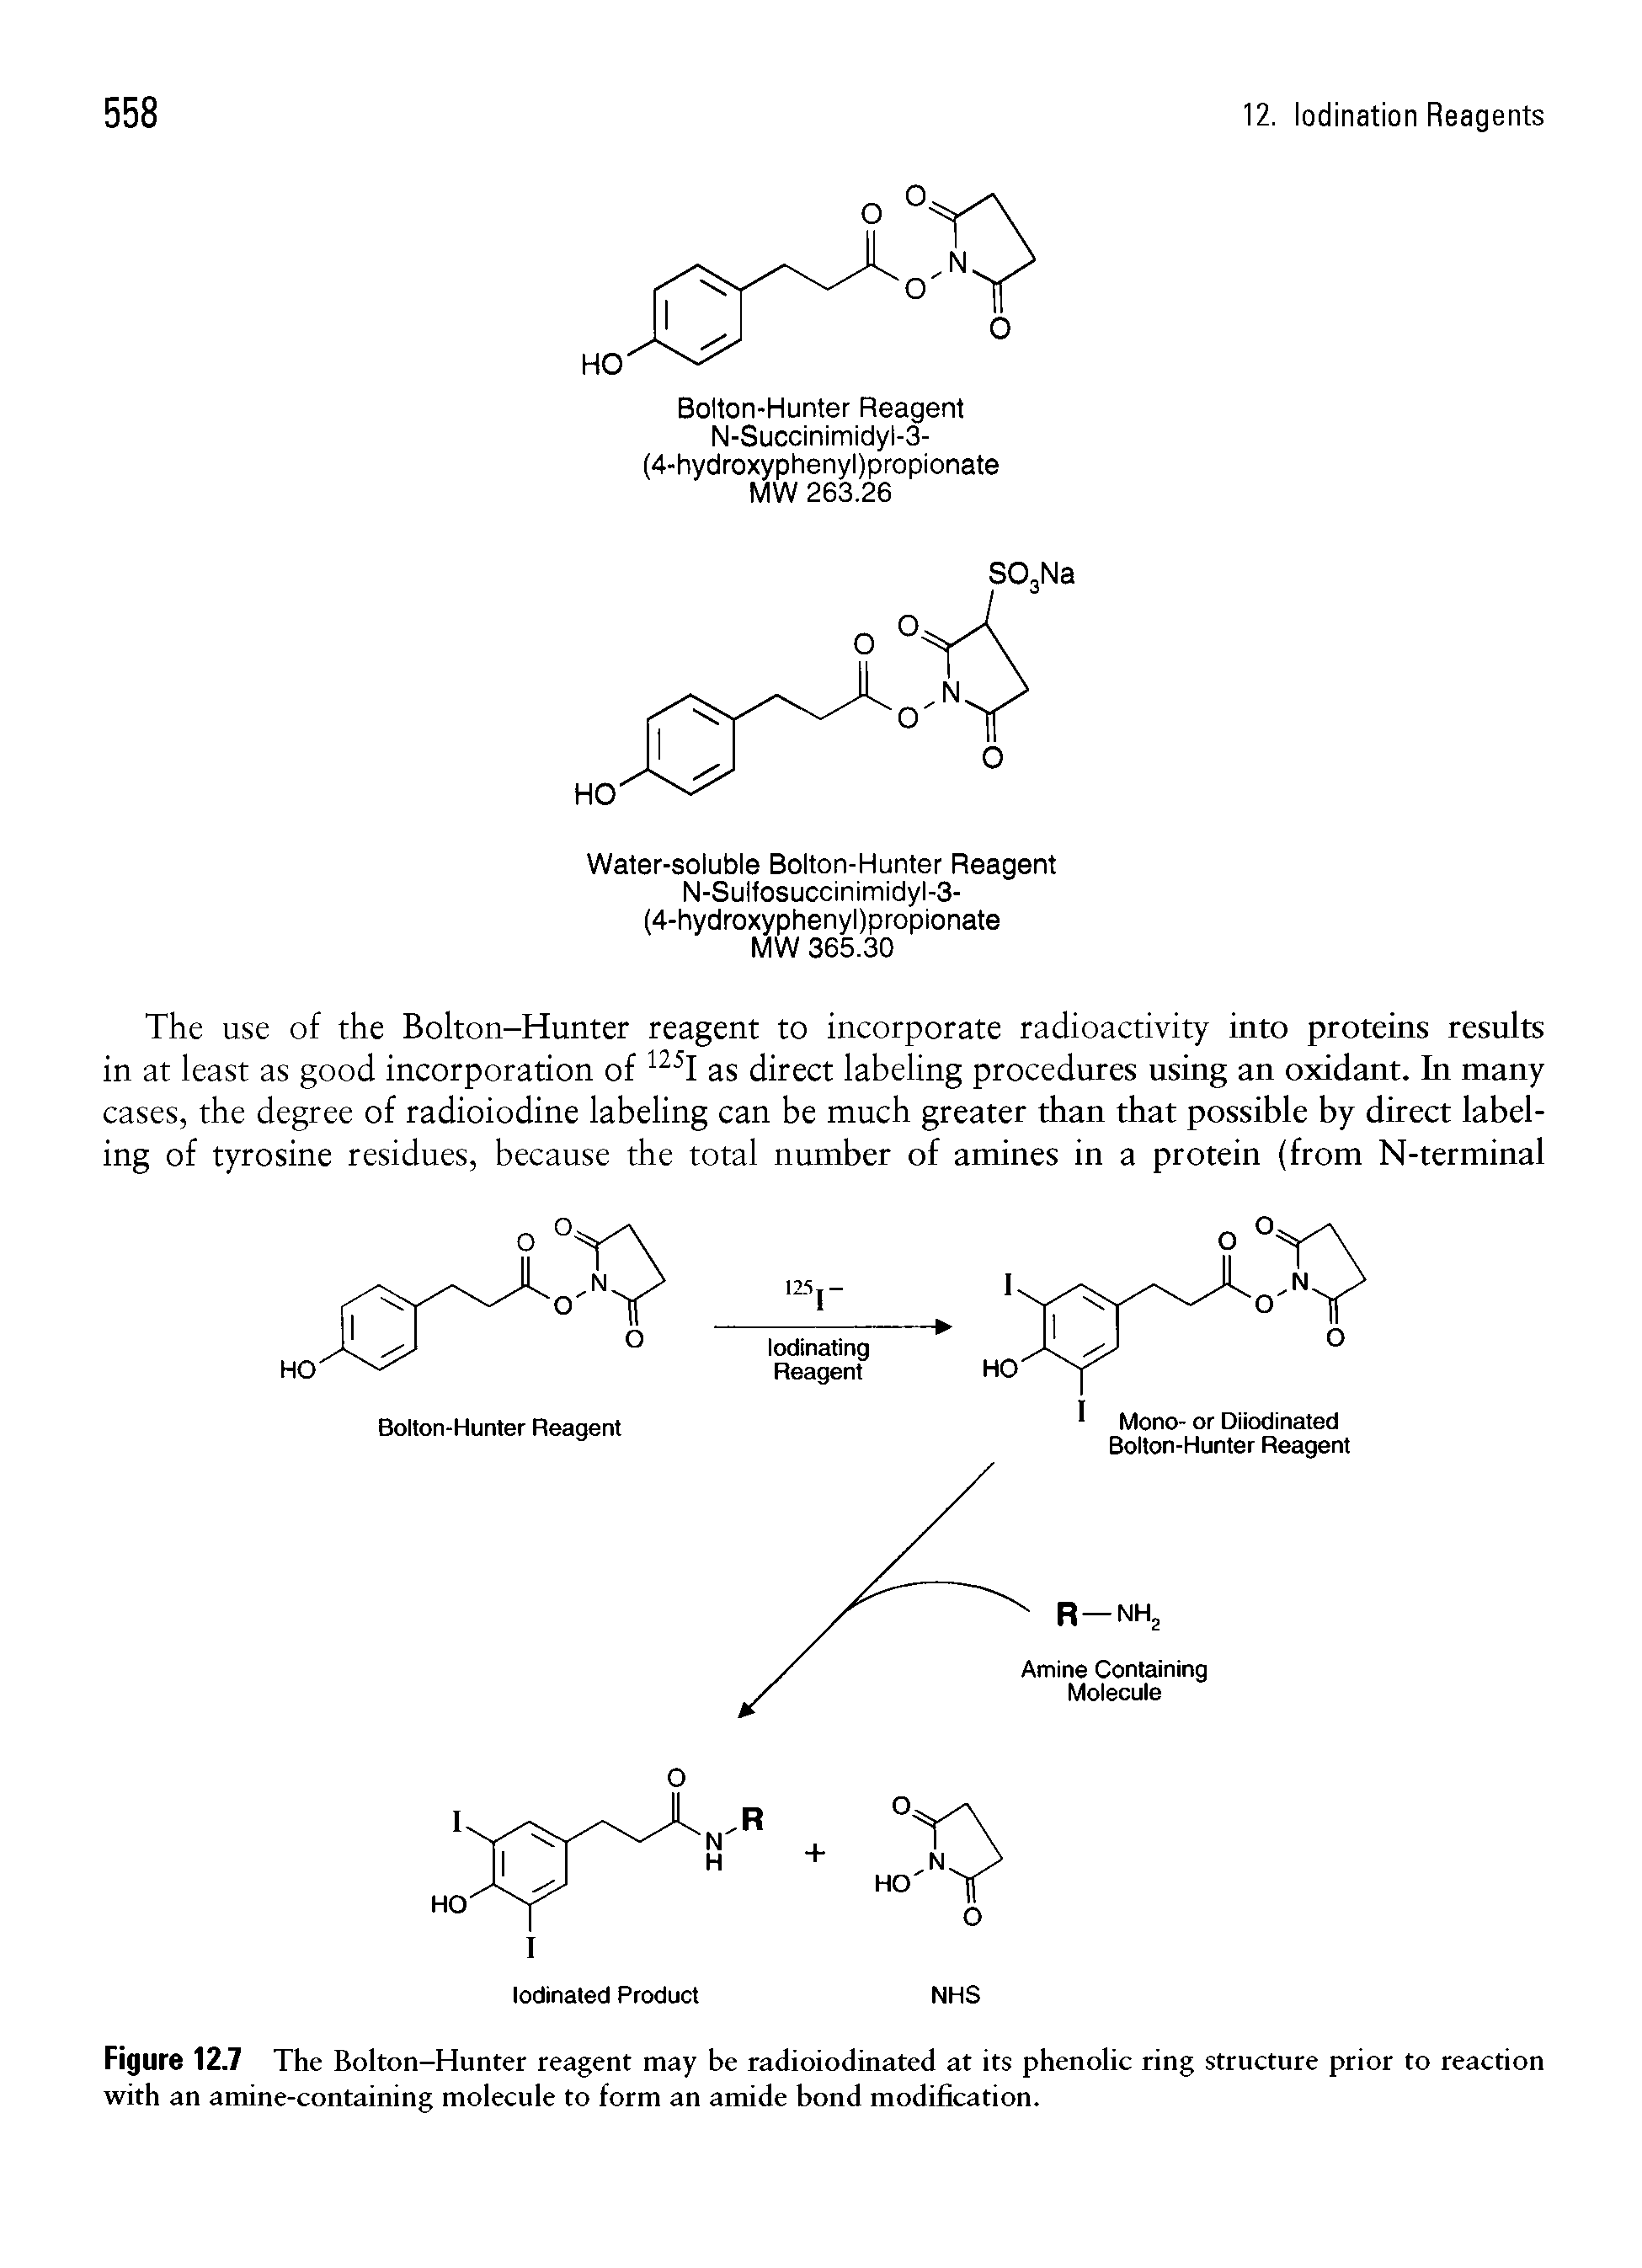 Figure 12.7 The Bolton-Hunter reagent may be radioiodinated at its phenolic ring structure prior to reaction with an amine-containing molecule to form an amide bond modification.